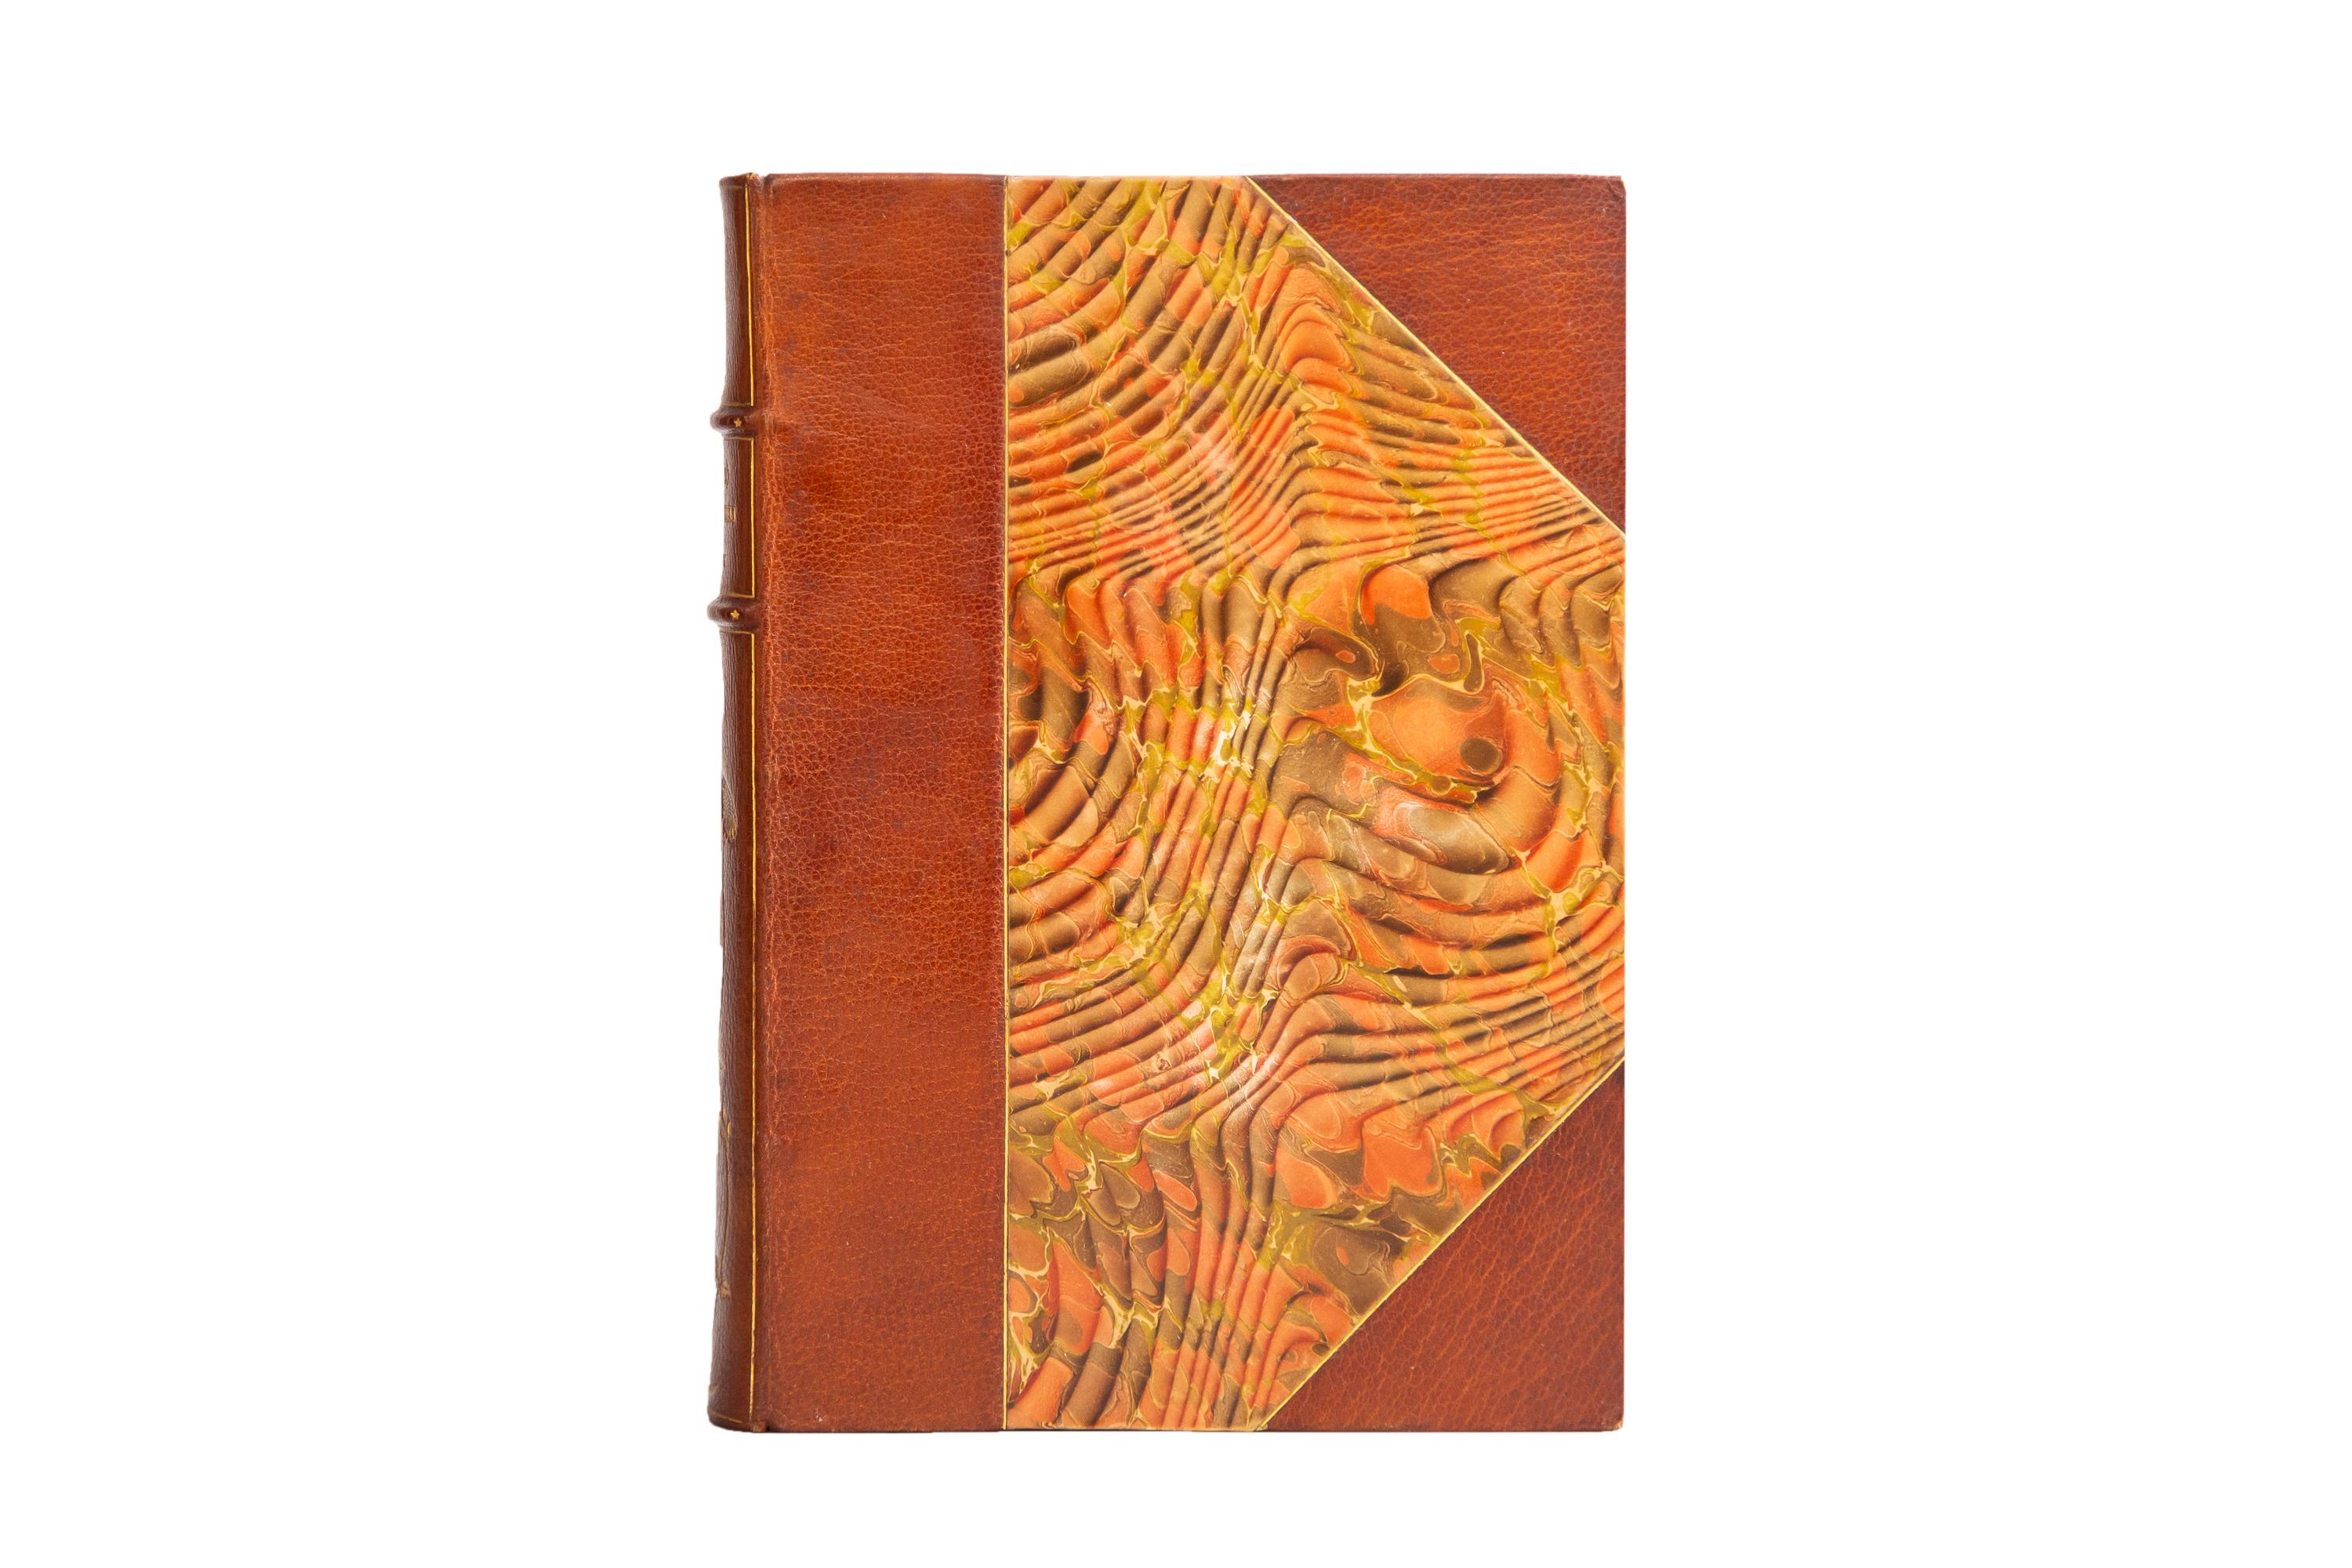 1 Volume. Prof. Pasquale Villari, The Life and Times of Niccolò Machiavelli. Popular edition. Bound in 3/4 brown morocco and marbled boards. Raised band spine with floral detail and titles in gilt. Top edge gilt with marbled endpapers. Translated by